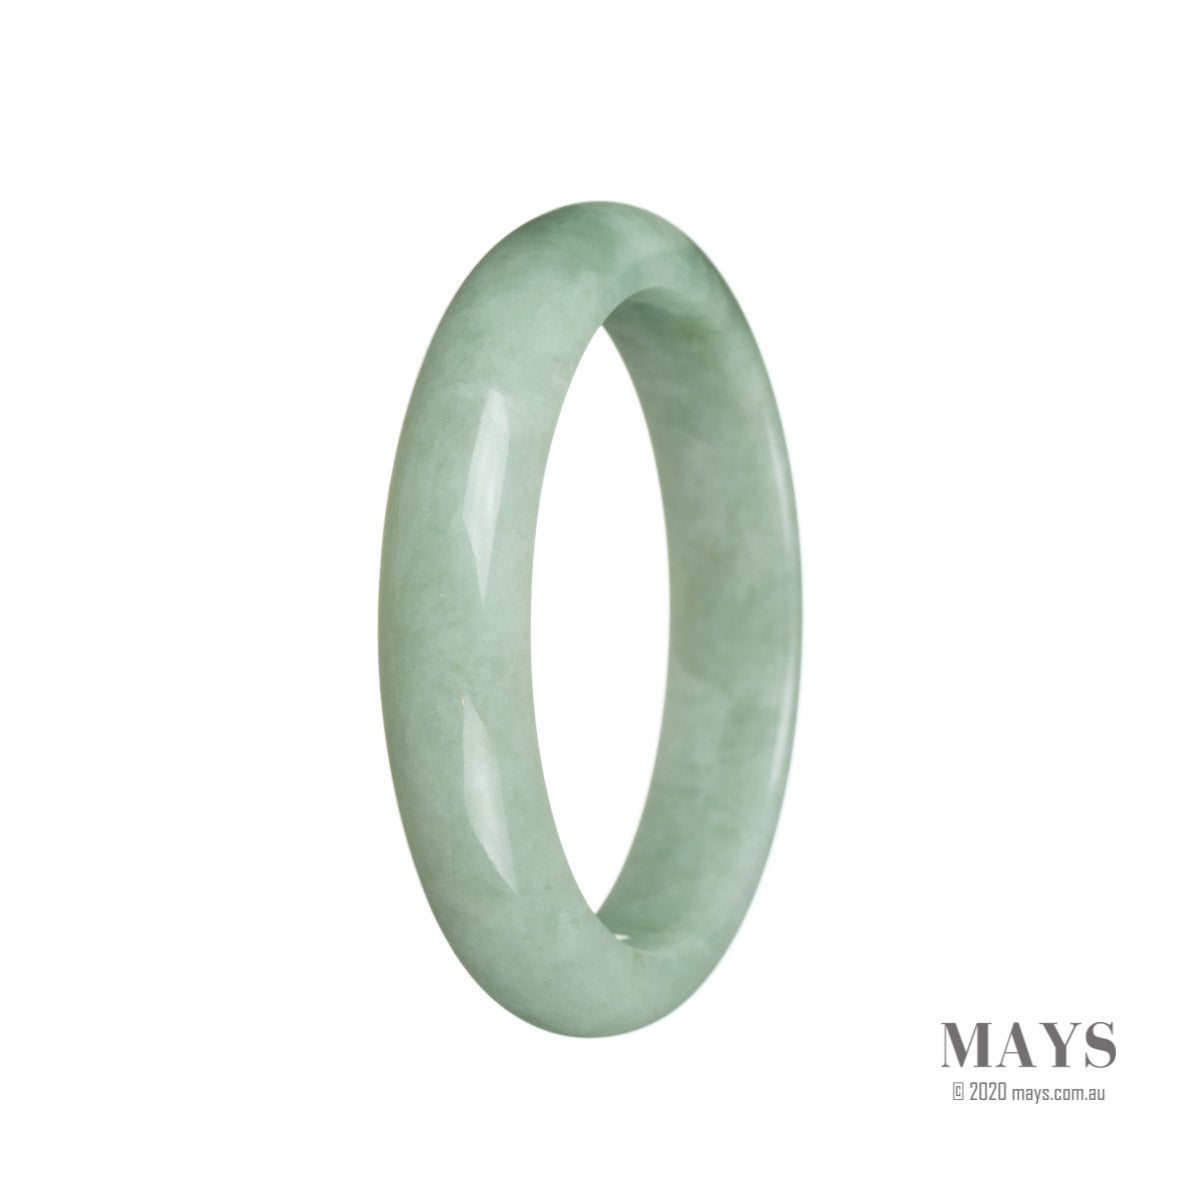 A stunning semi-round Real Grade A Green Jadeite Bangle Bracelet, measuring 59mm in diameter, crafted by MAYS.